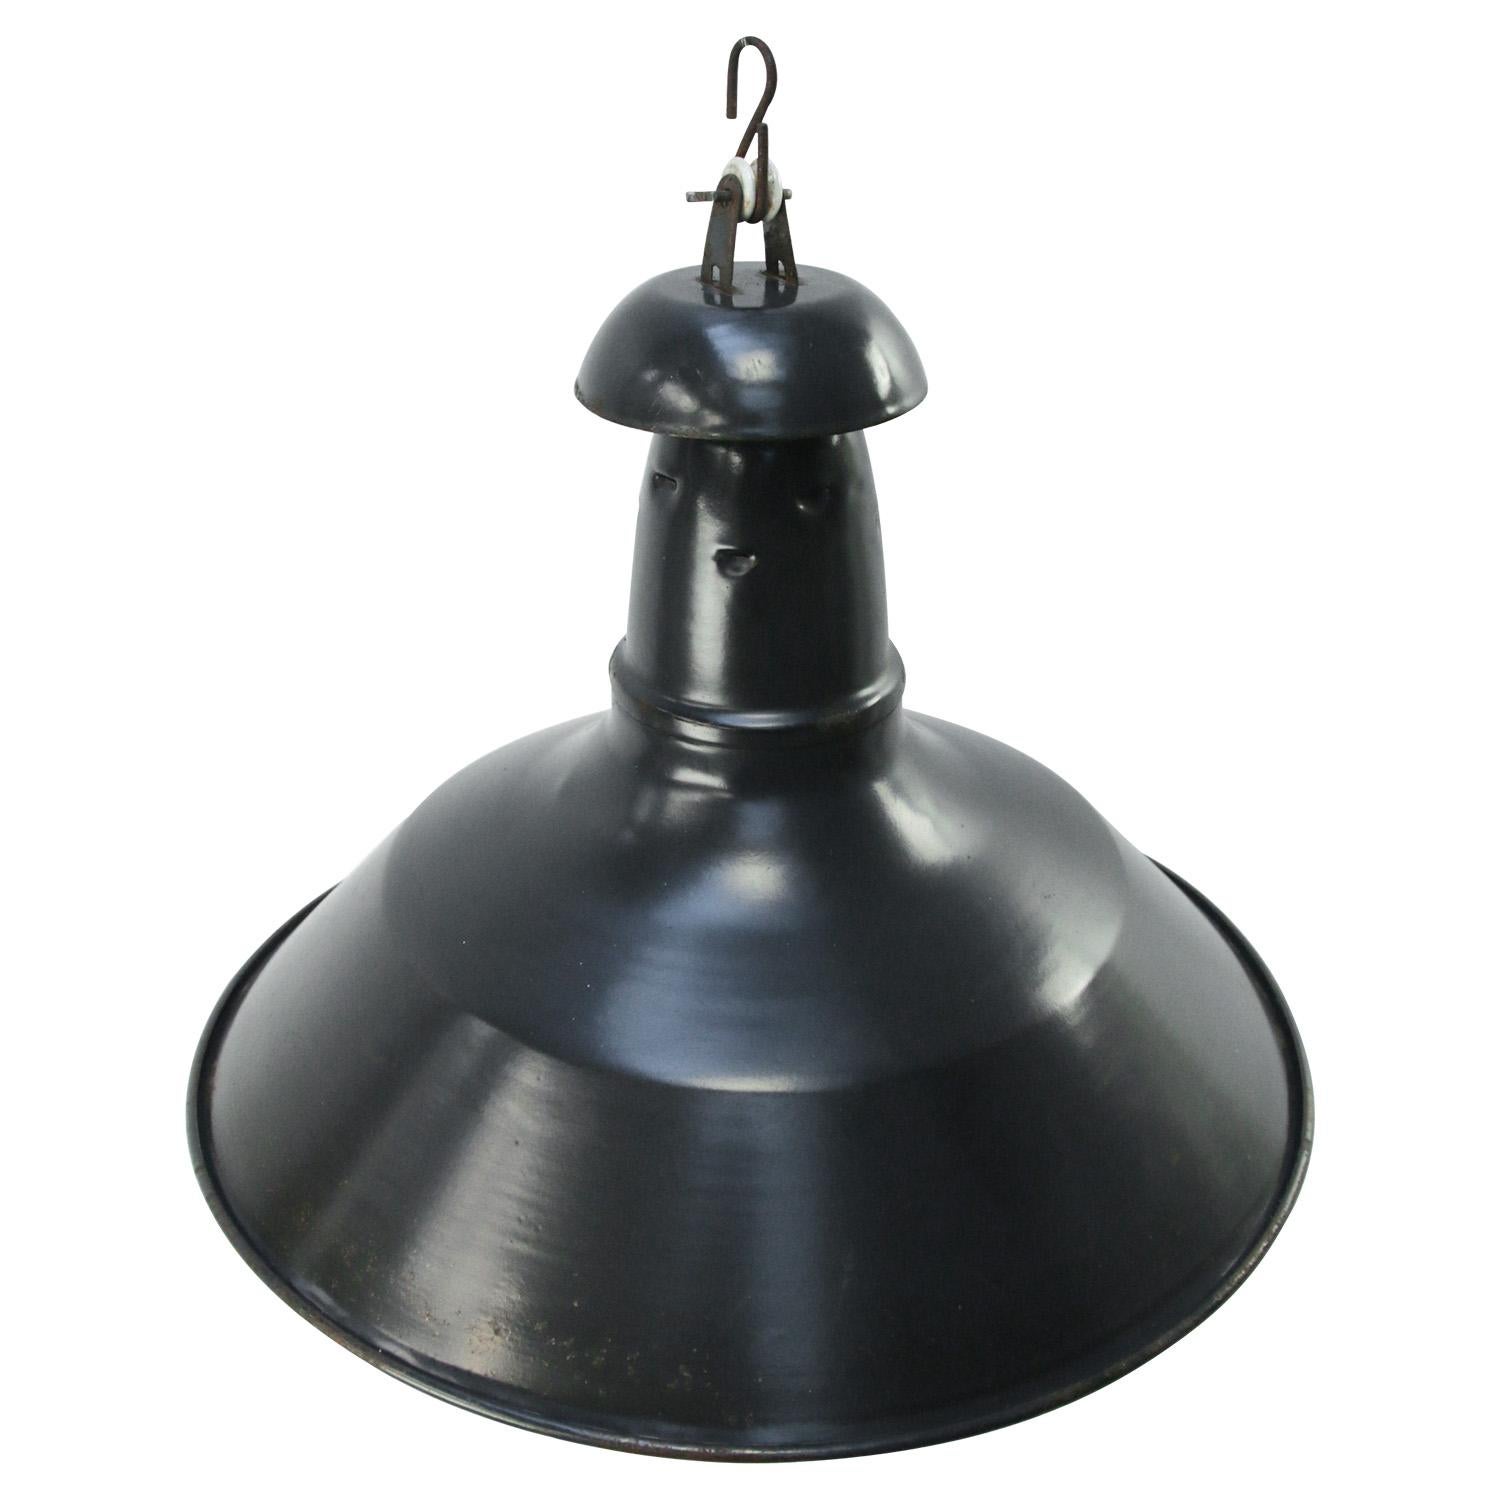 French blue black Industrial pendant lamp.
Used in warehouses and factories in France and Belgium. 

Weight: 1.50 kg / 3.3 lb

Priced per individual item. All lamps have been made suitable by international standards for incandescent light bulbs,